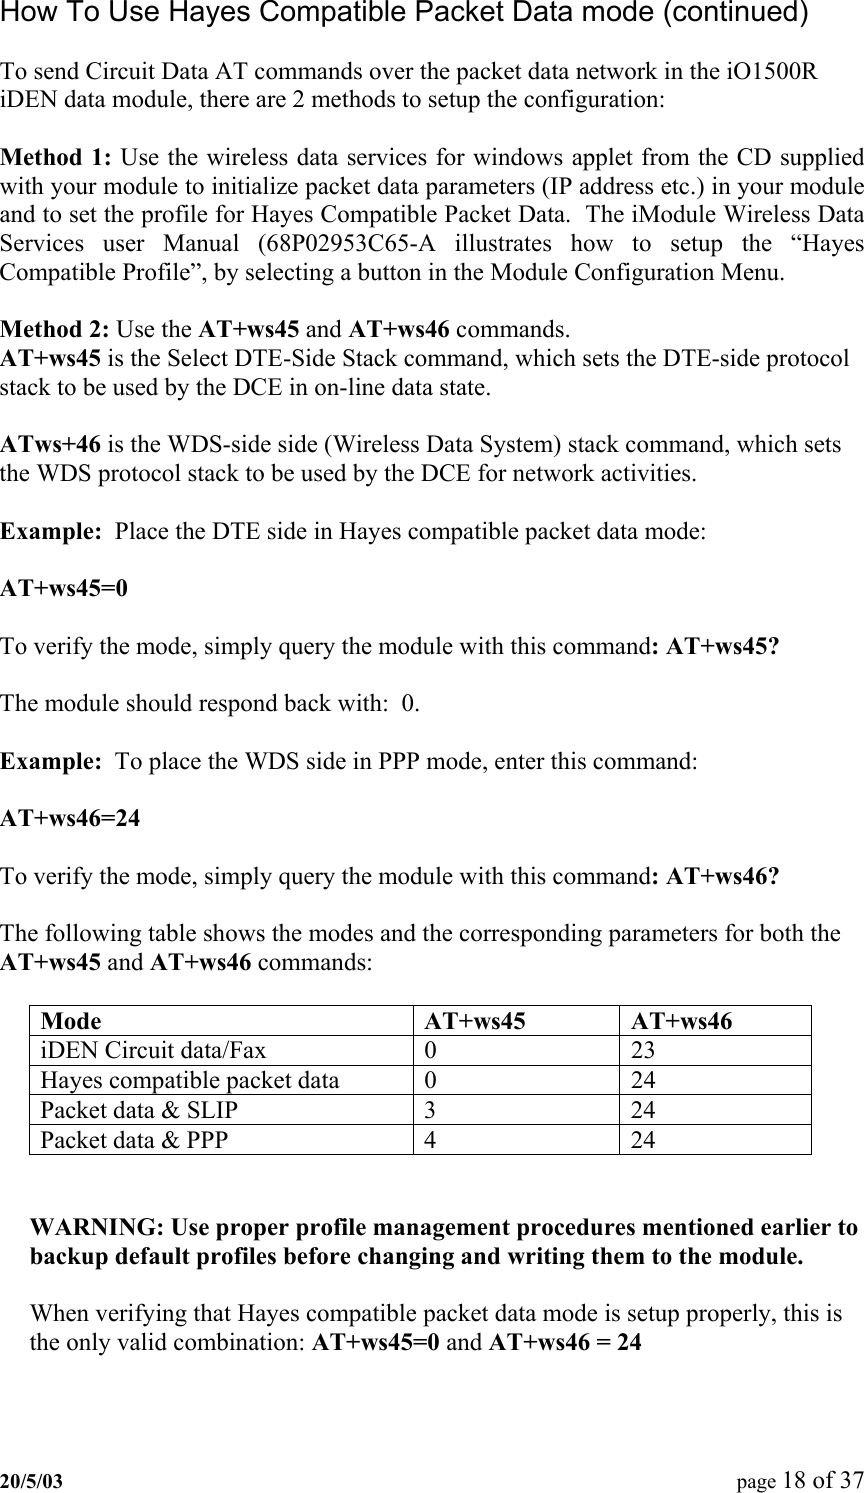 How To Use Hayes Compatible Packet Data mode (continued)  To send Circuit Data AT commands over the packet data network in the iO1500R iDEN data module, there are 2 methods to setup the configuration:  Method 1: Use the wireless data services for windows applet from the CD supplied with your module to initialize packet data parameters (IP address etc.) in your module and to set the profile for Hayes Compatible Packet Data.  The iModule Wireless Data Services user Manual (68P02953C65-A illustrates how to setup the “Hayes Compatible Profile”, by selecting a button in the Module Configuration Menu.  Method 2: Use the AT+ws45 and AT+ws46 commands. AT+ws45 is the Select DTE-Side Stack command, which sets the DTE-side protocol stack to be used by the DCE in on-line data state.  ATws+46 is the WDS-side side (Wireless Data System) stack command, which sets the WDS protocol stack to be used by the DCE for network activities.  Example:  Place the DTE side in Hayes compatible packet data mode:   AT+ws45=0  To verify the mode, simply query the module with this command: AT+ws45?  The module should respond back with:  0.  Example:  To place the WDS side in PPP mode, enter this command:  AT+ws46=24  To verify the mode, simply query the module with this command: AT+ws46?  The following table shows the modes and the corresponding parameters for both the AT+ws45 and AT+ws46 commands:  Mode  AT+ws45   AT+ws46  iDEN Circuit data/Fax  0  23 Hayes compatible packet data  0  24 Packet data &amp; SLIP  3  24 Packet data &amp; PPP  4  24   WARNING: Use proper profile management procedures mentioned earlier to backup default profiles before changing and writing them to the module.  When verifying that Hayes compatible packet data mode is setup properly, this is the only valid combination: AT+ws45=0 and AT+ws46 = 24   20/5/03  page 18 of 37   